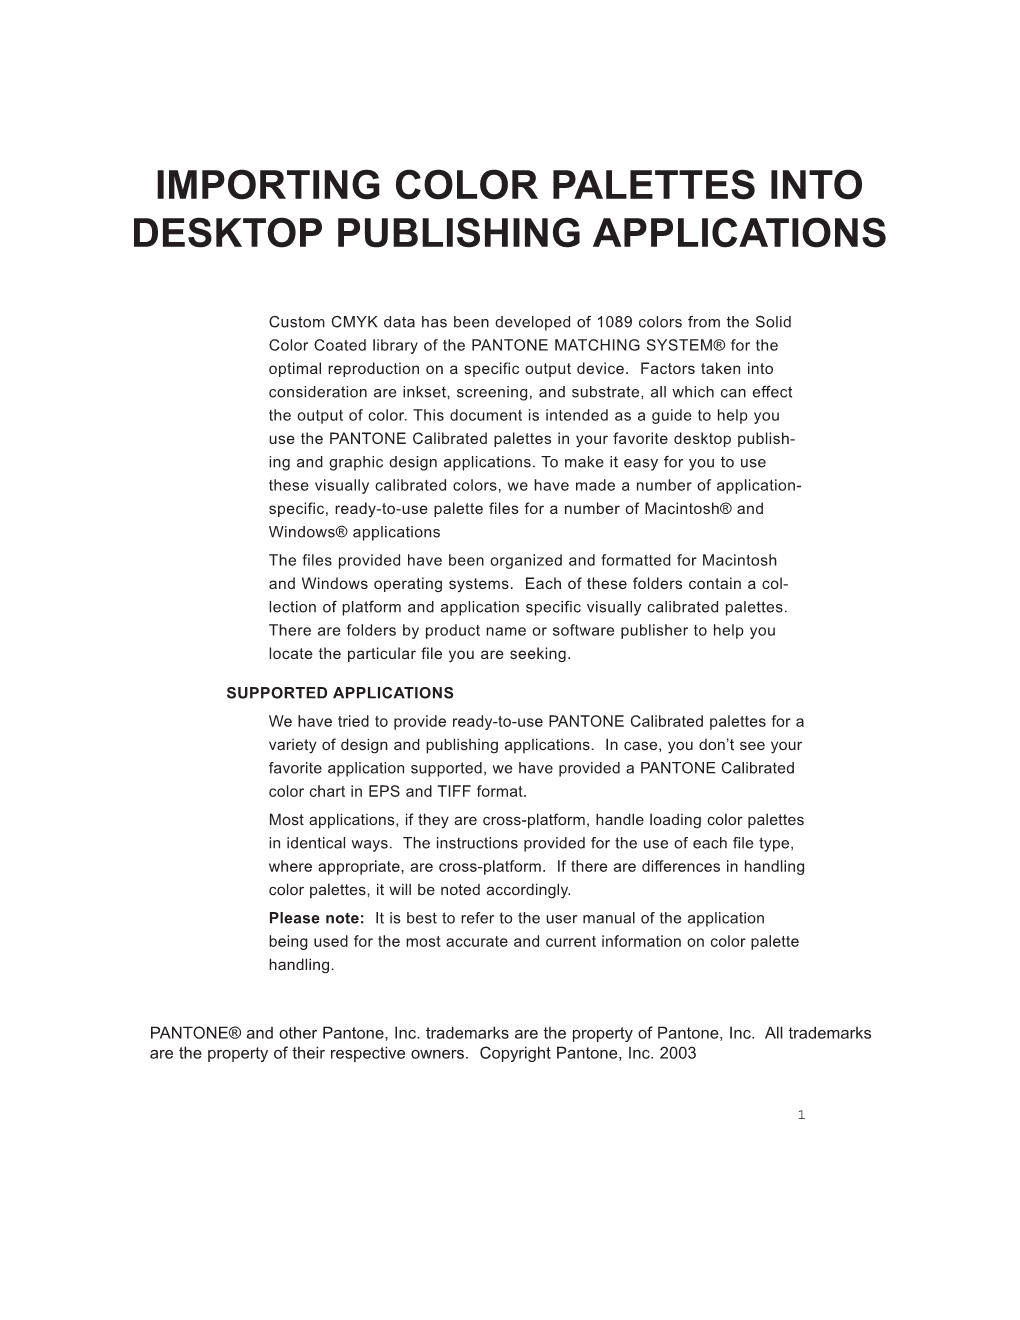 Importing Color Palettes Into Desktop Publishing Applications